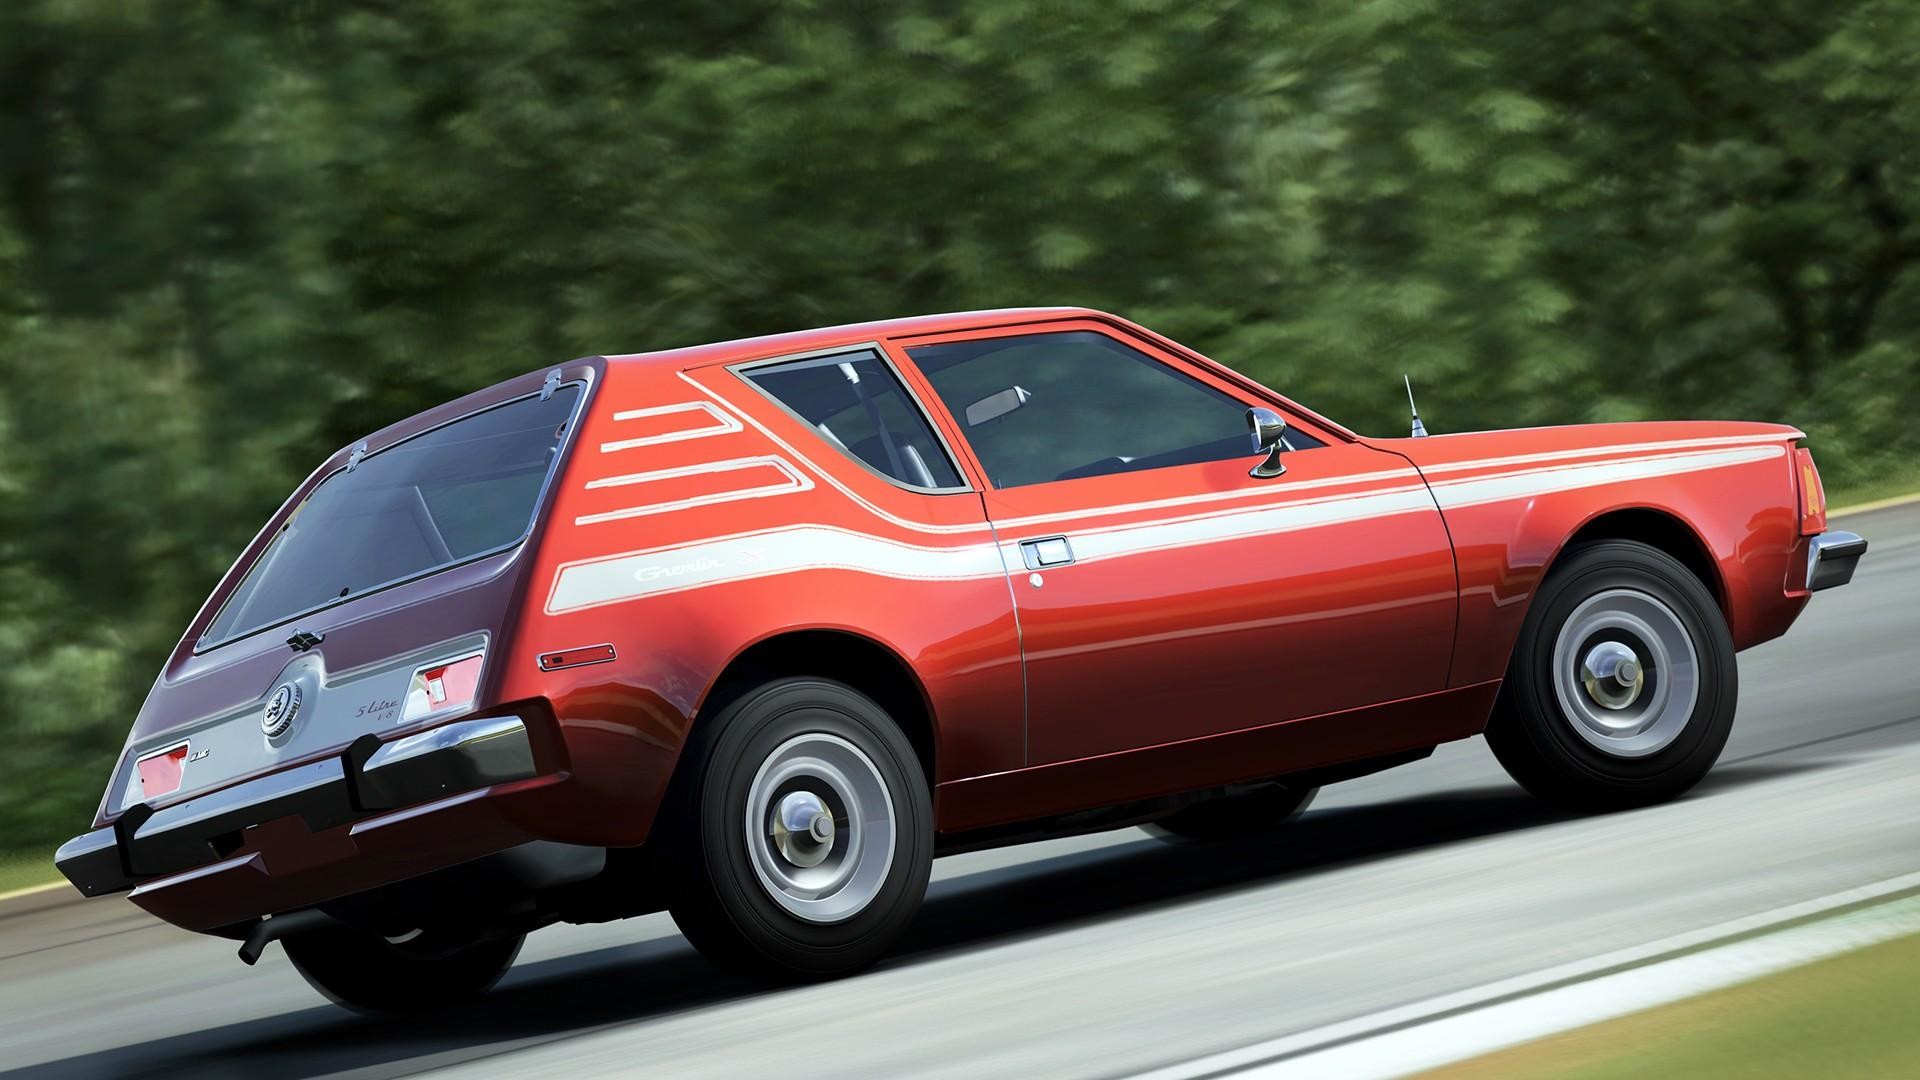 1920x1080 AMC Gremlin wallpapers for iphone